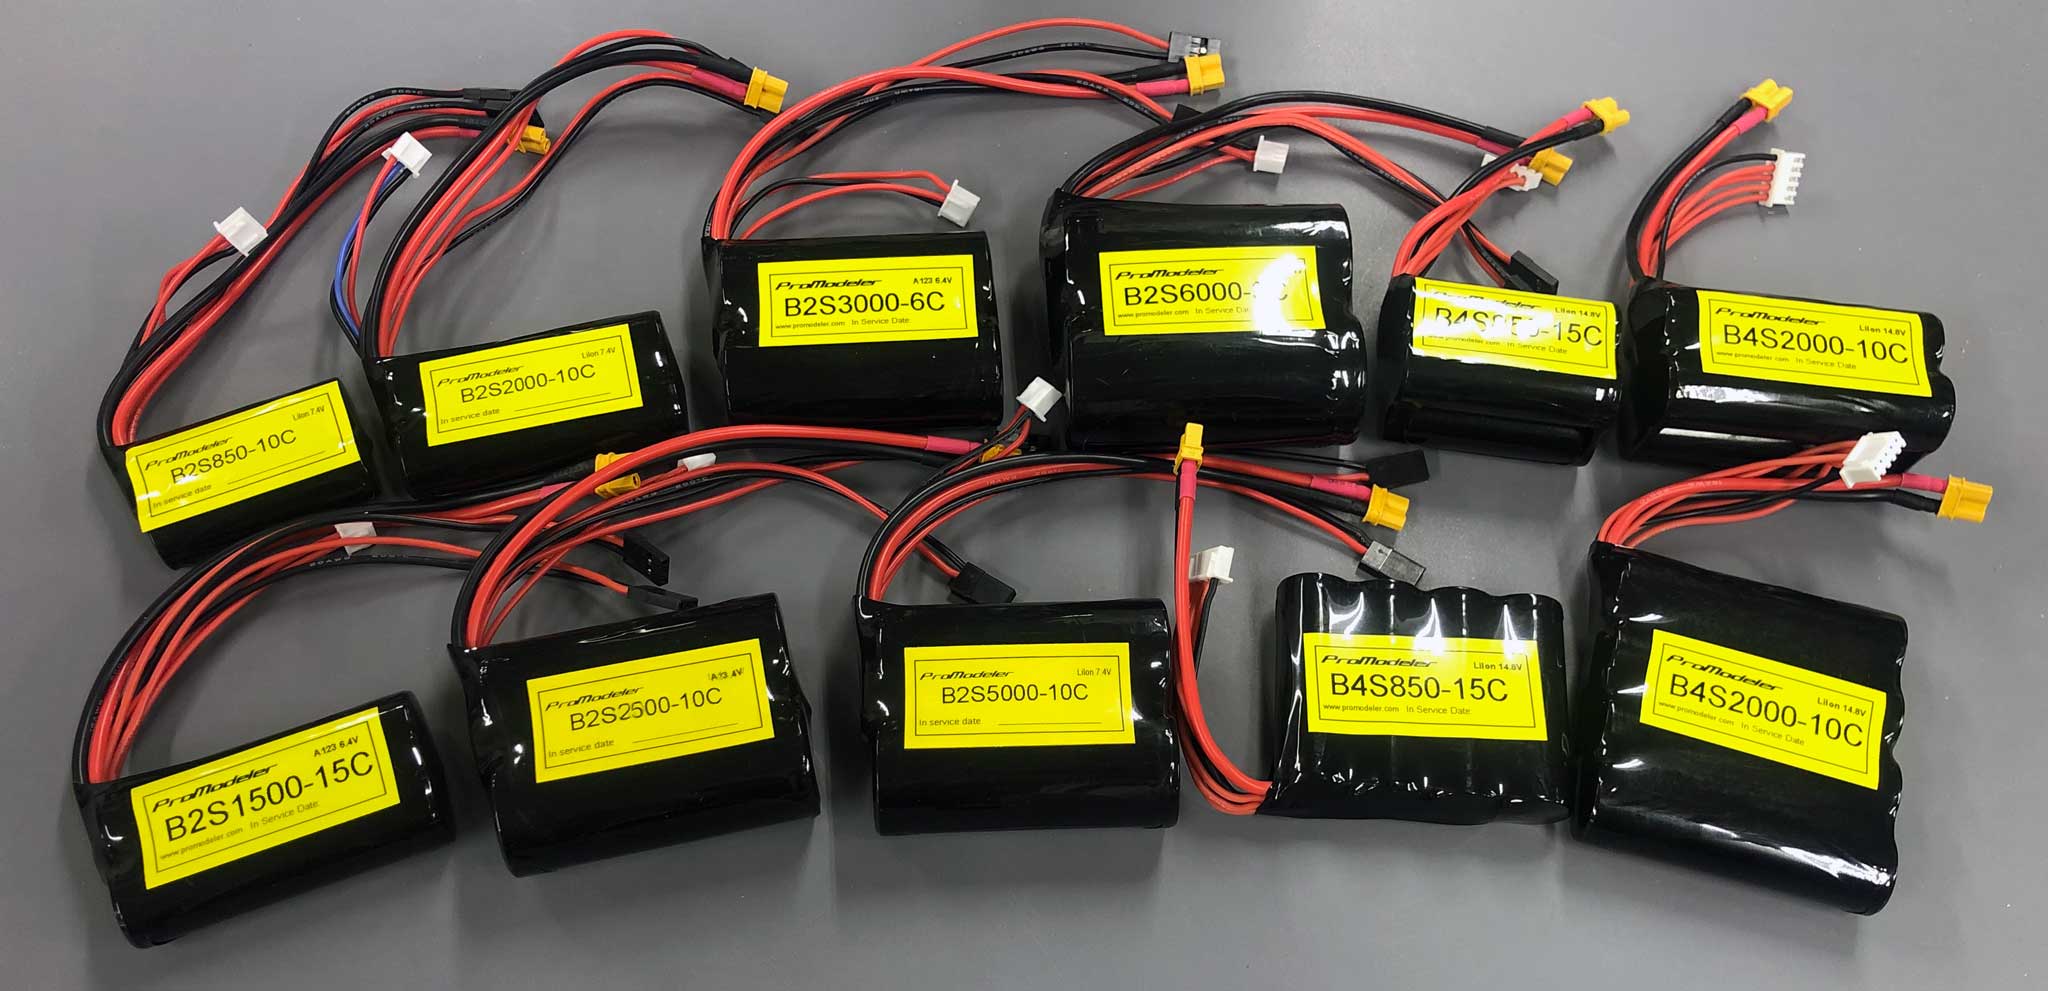 Ranging from 850 to 6000mAh, and in LiIon and LFP (LiFePO4) chemistries, these receiver packs are the best available